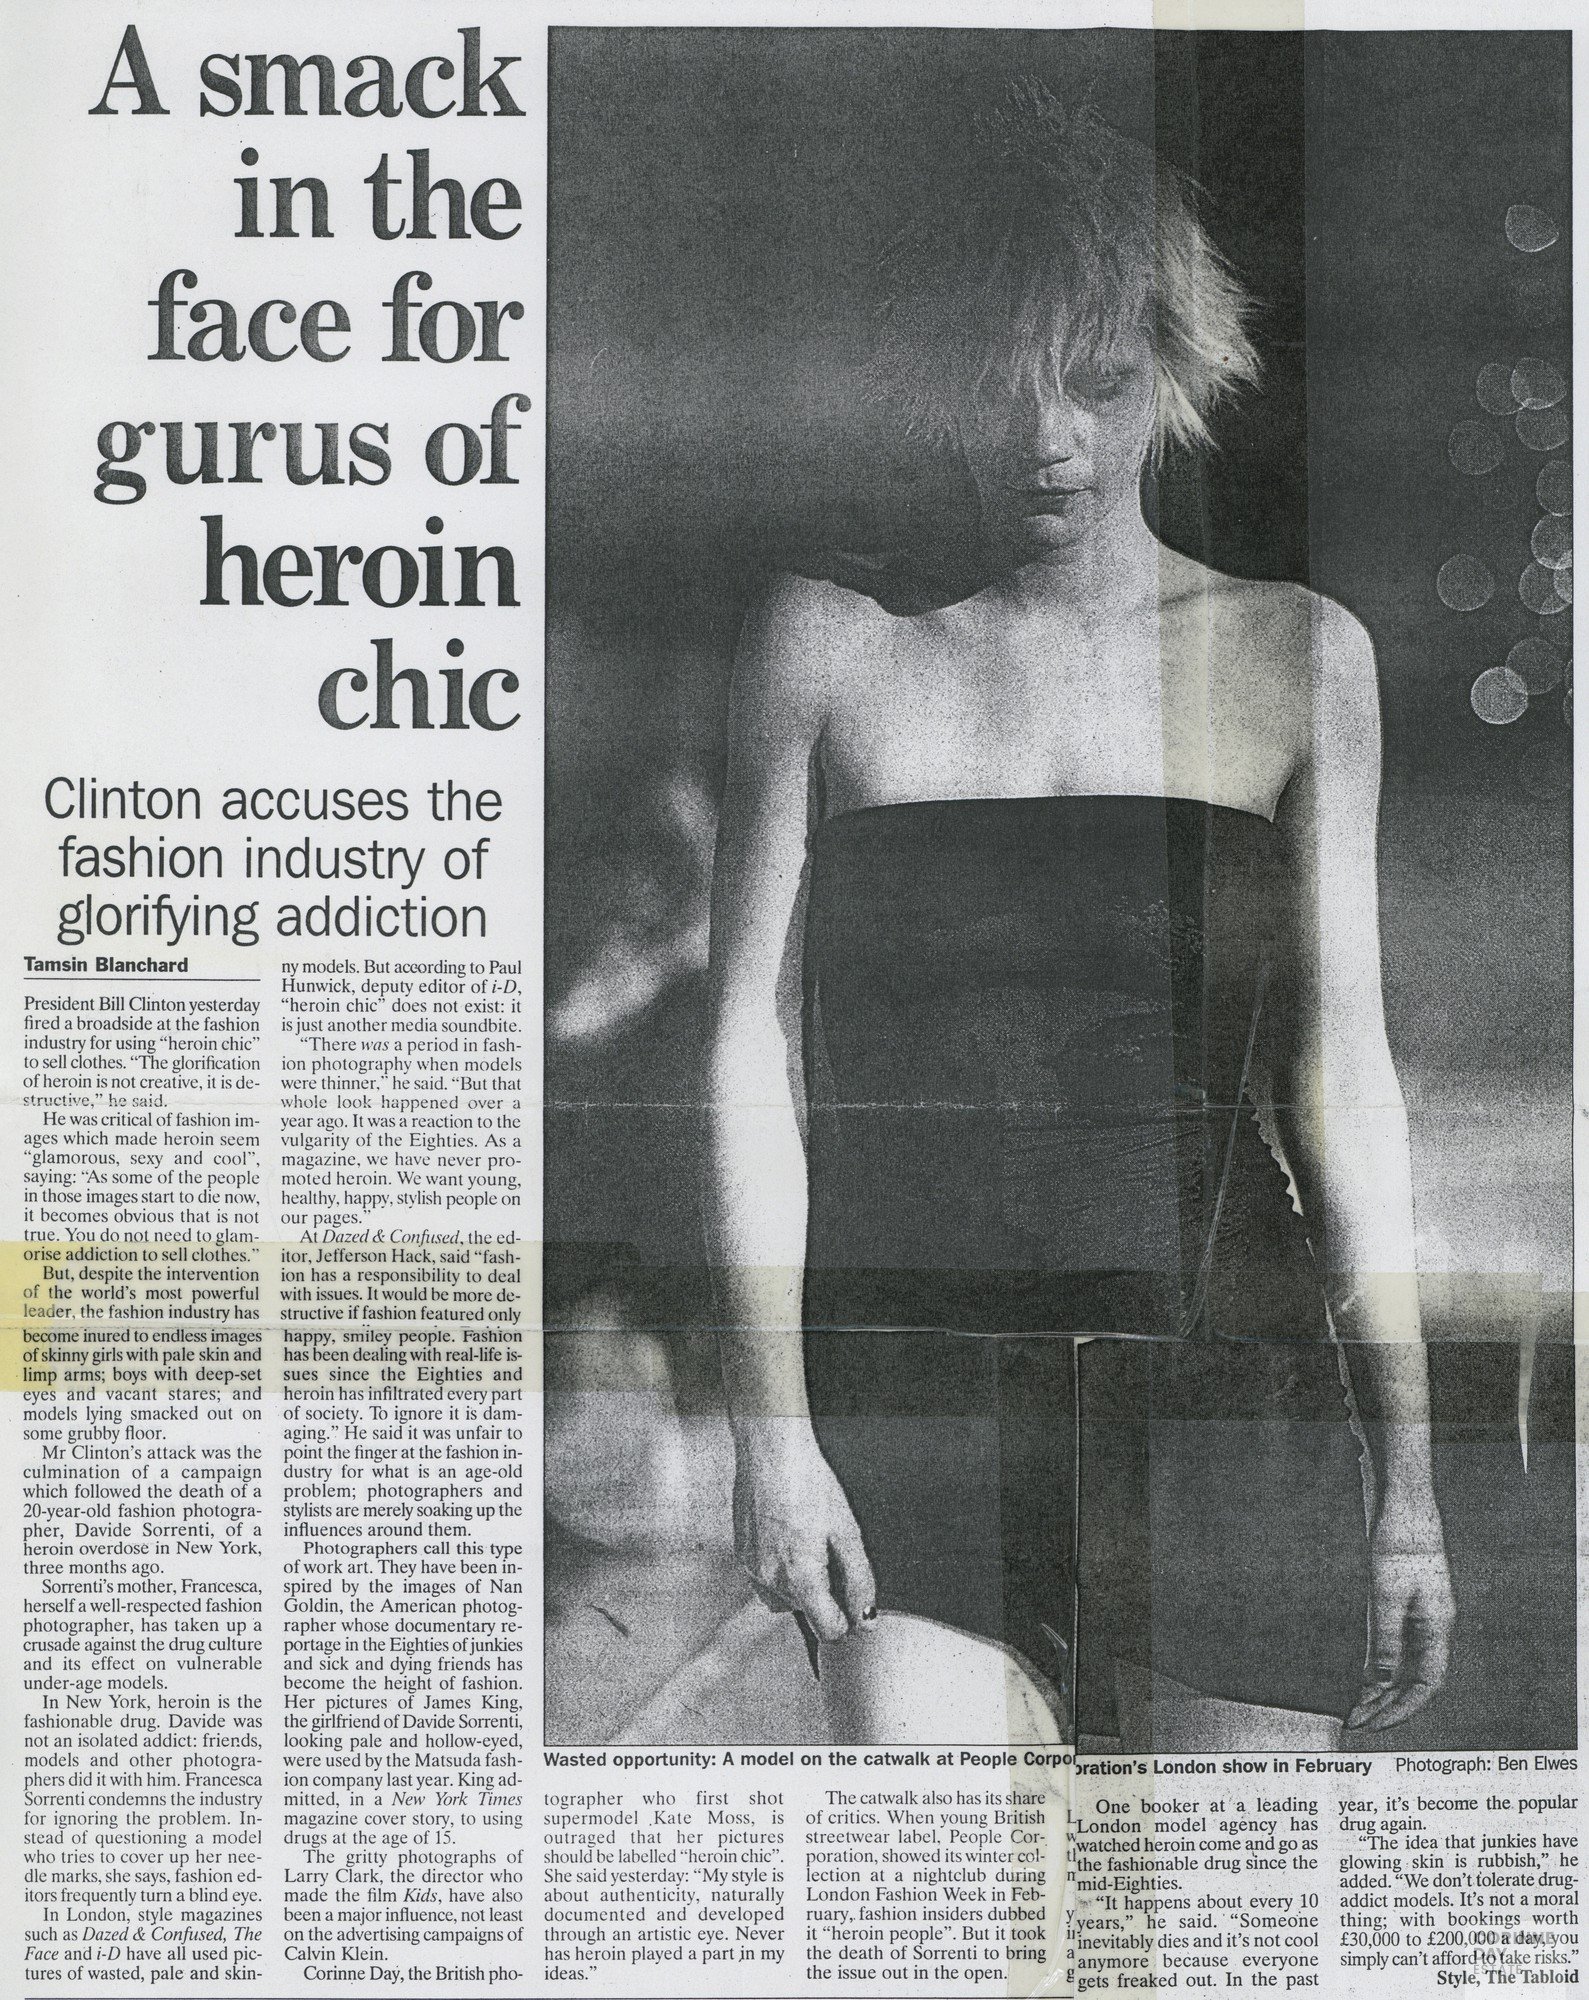 A smack in the face for gurus of heroin chic, The Independent, 23 May 1997 — Image 1 of 2